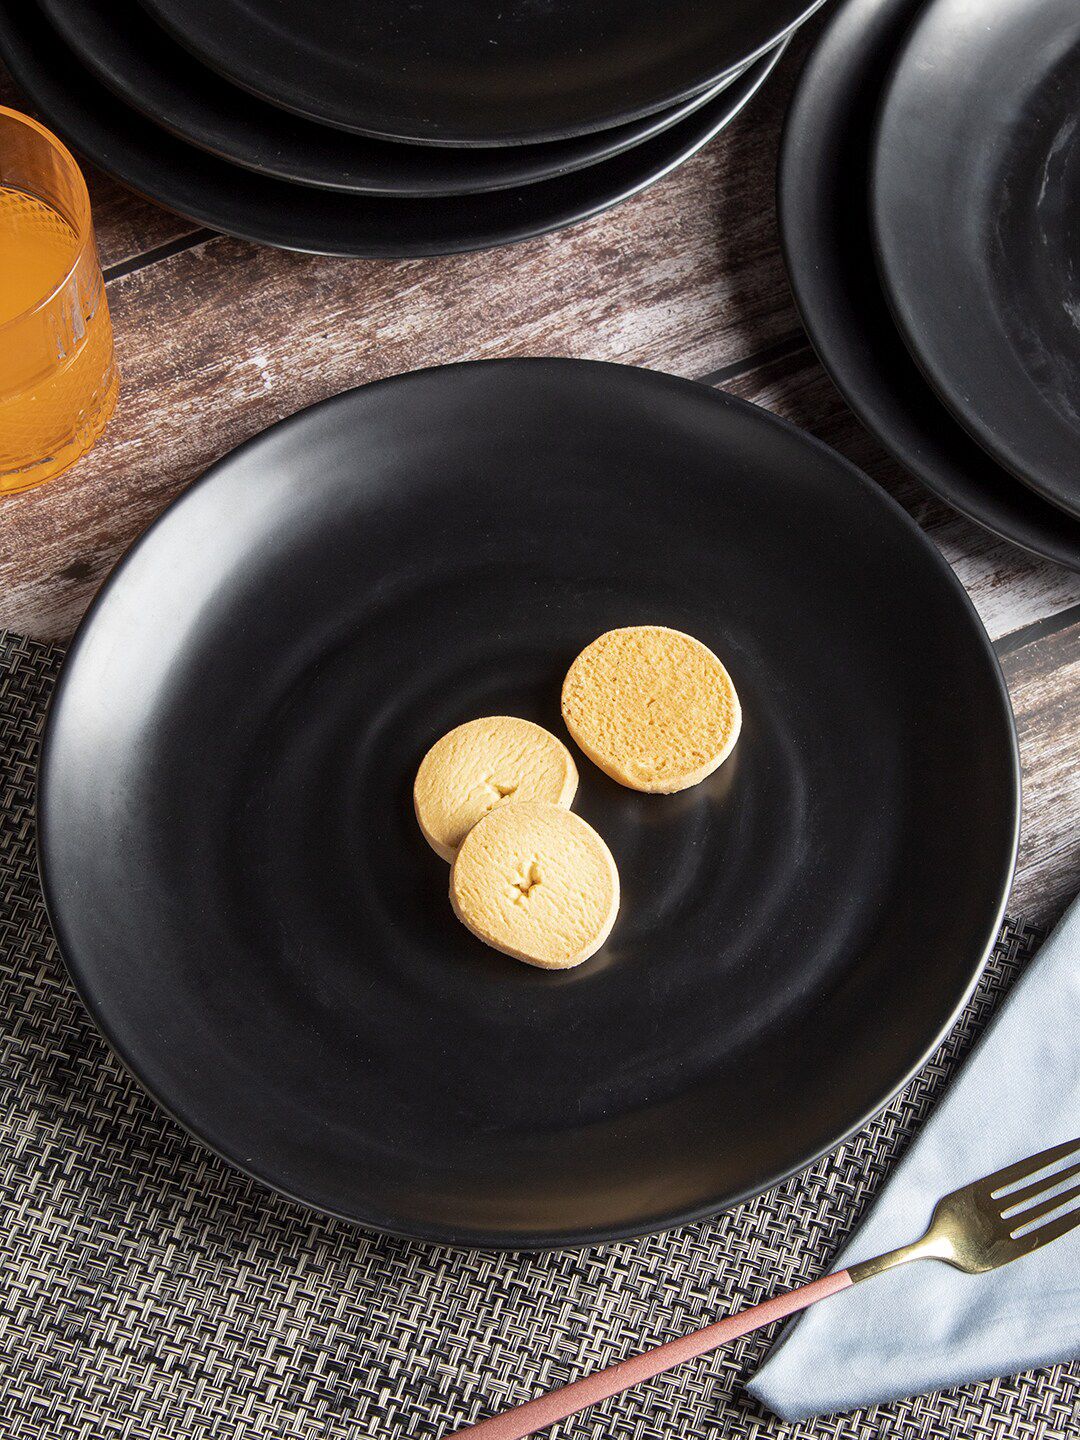 MARKET99 Black 6 Pieces Melamine Glossy Plates Price in India